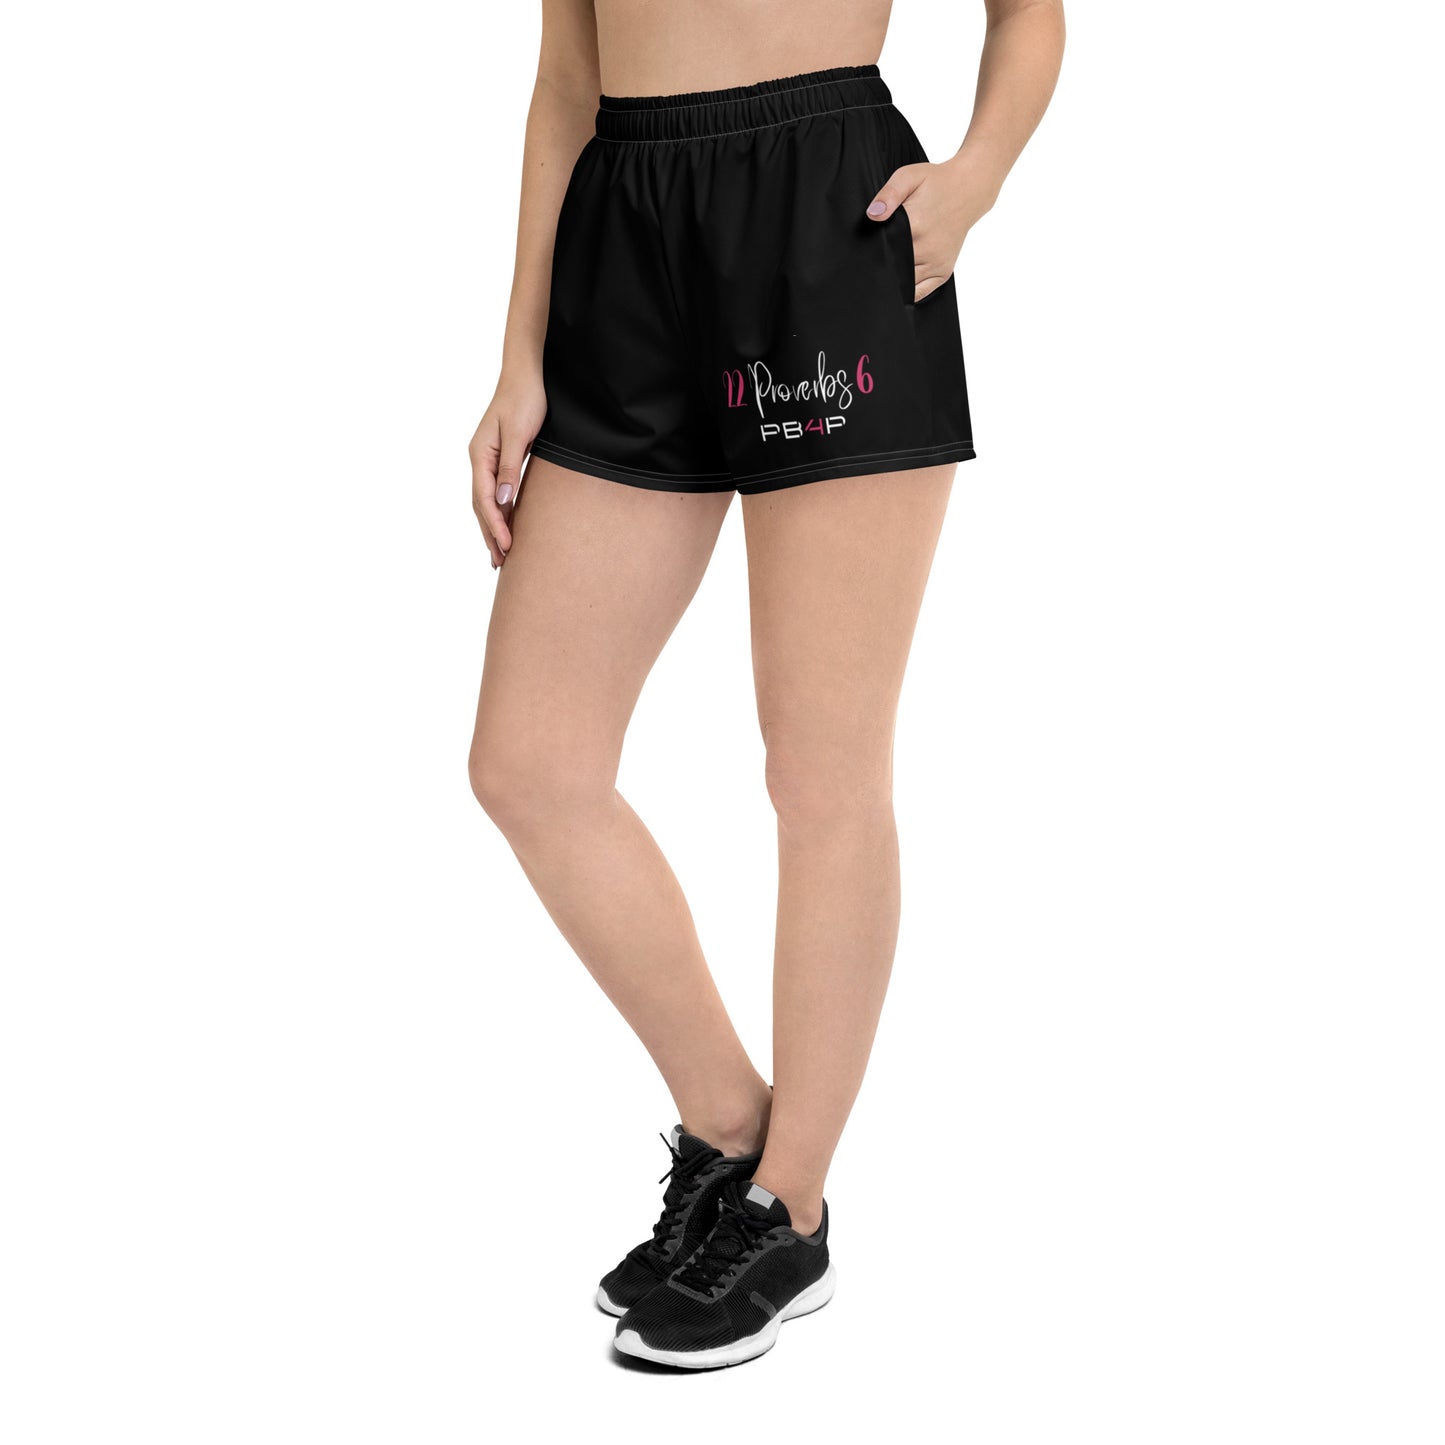 Proverbs 22:6 Women’s Athletic Shorts